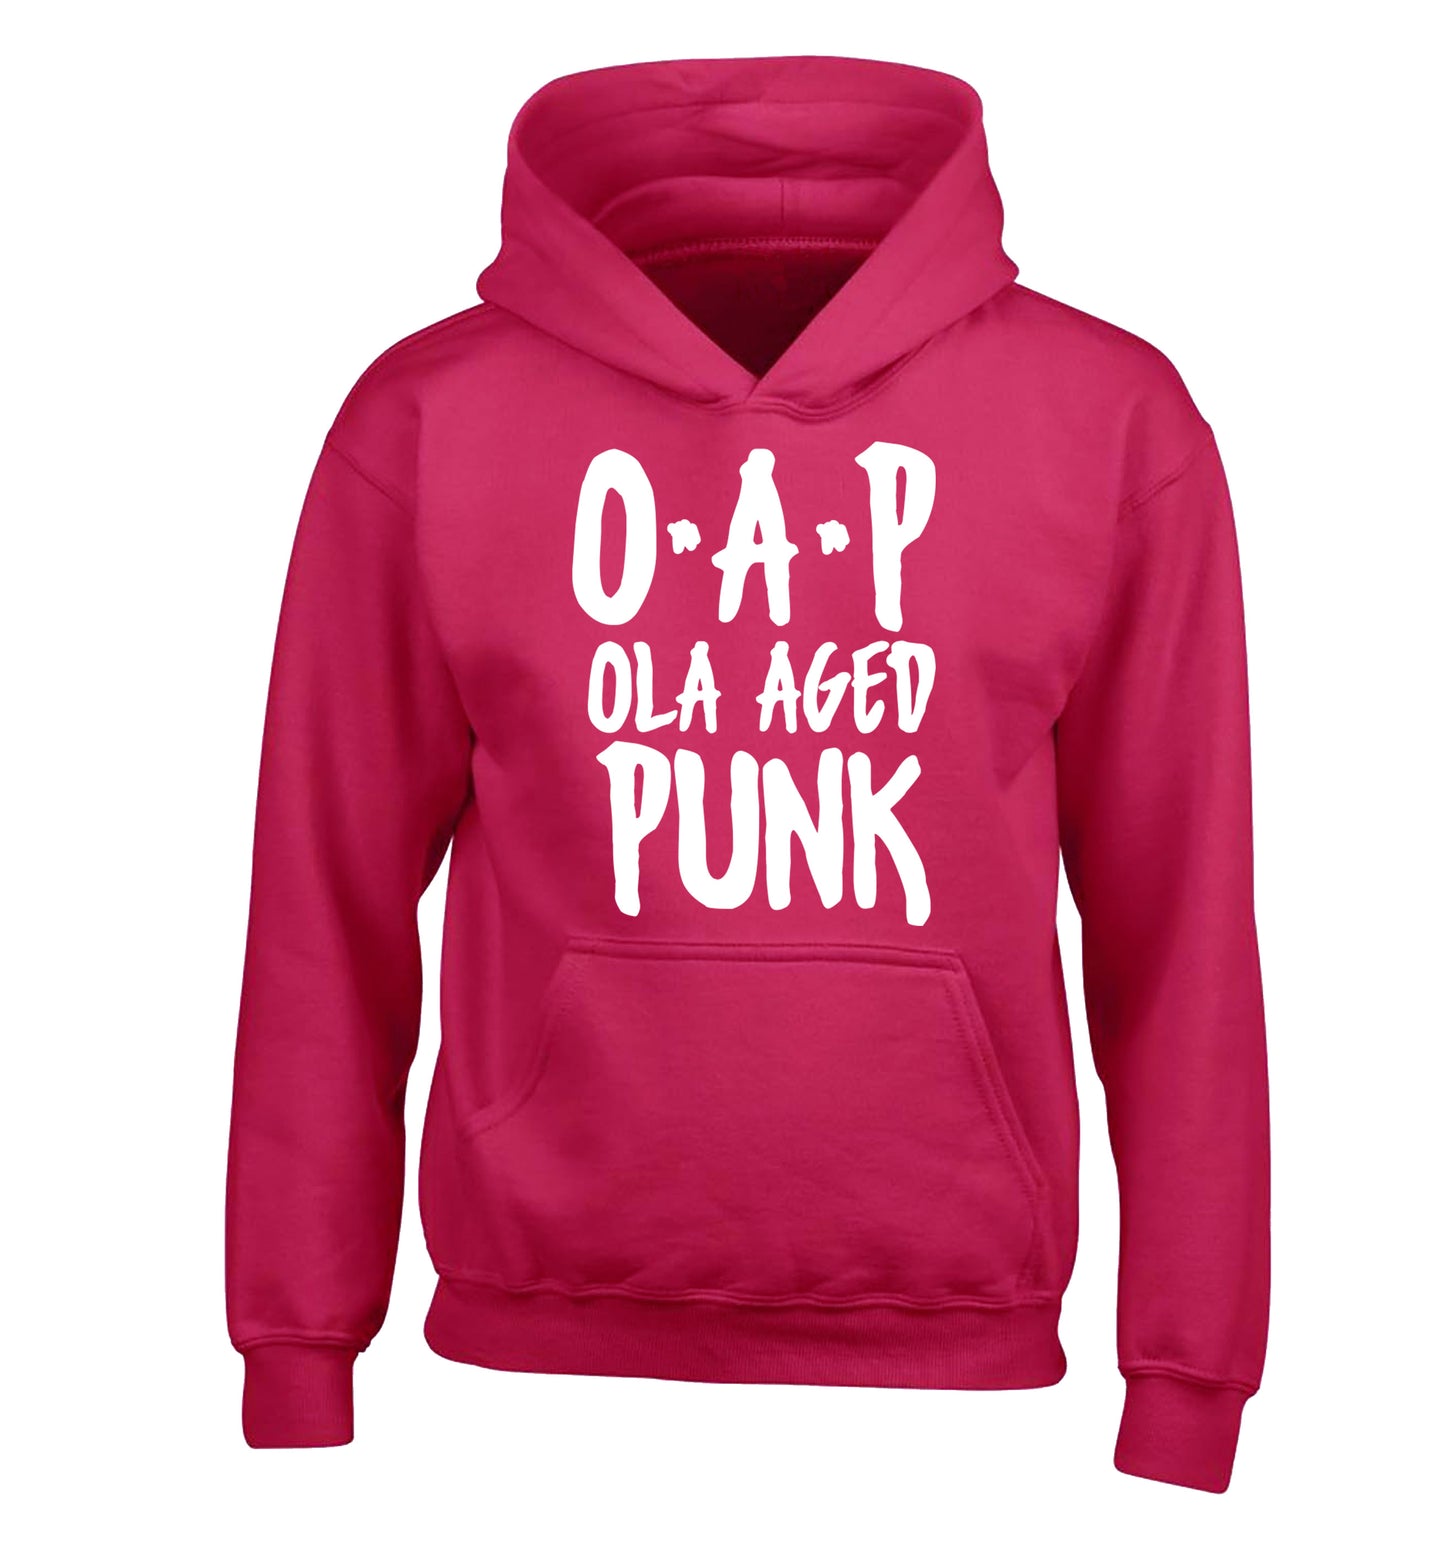 O.A.P Old Aged Punk children's pink hoodie 12-13 Years